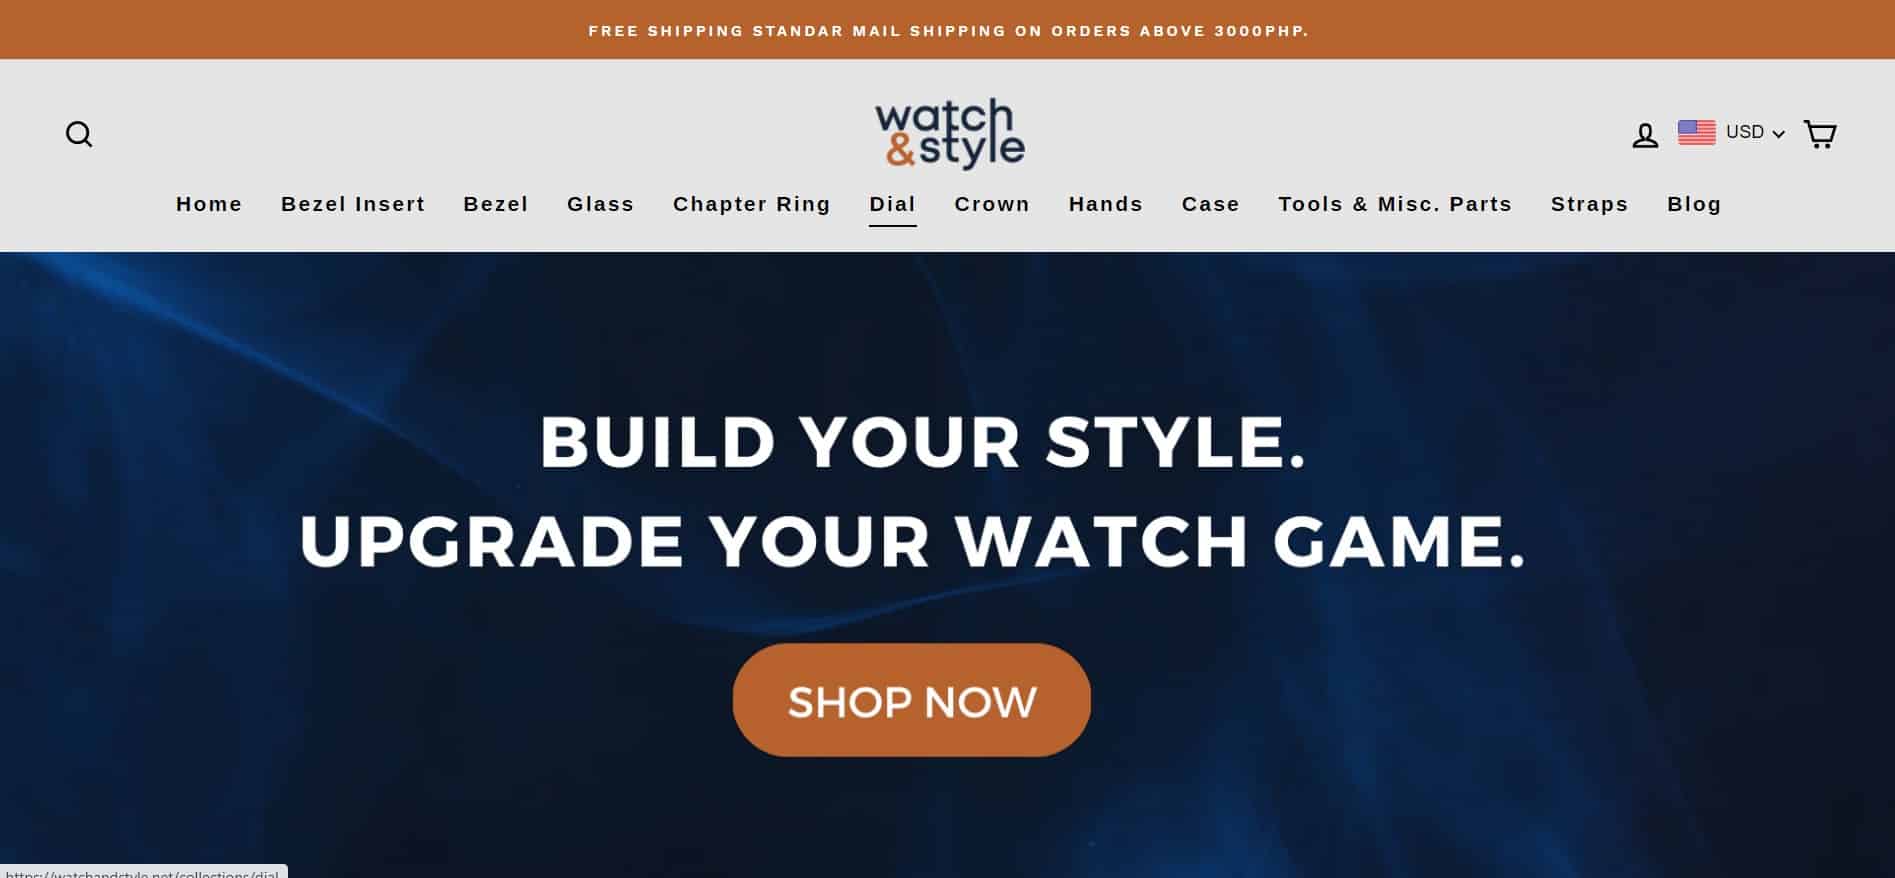 Watch and style homepage